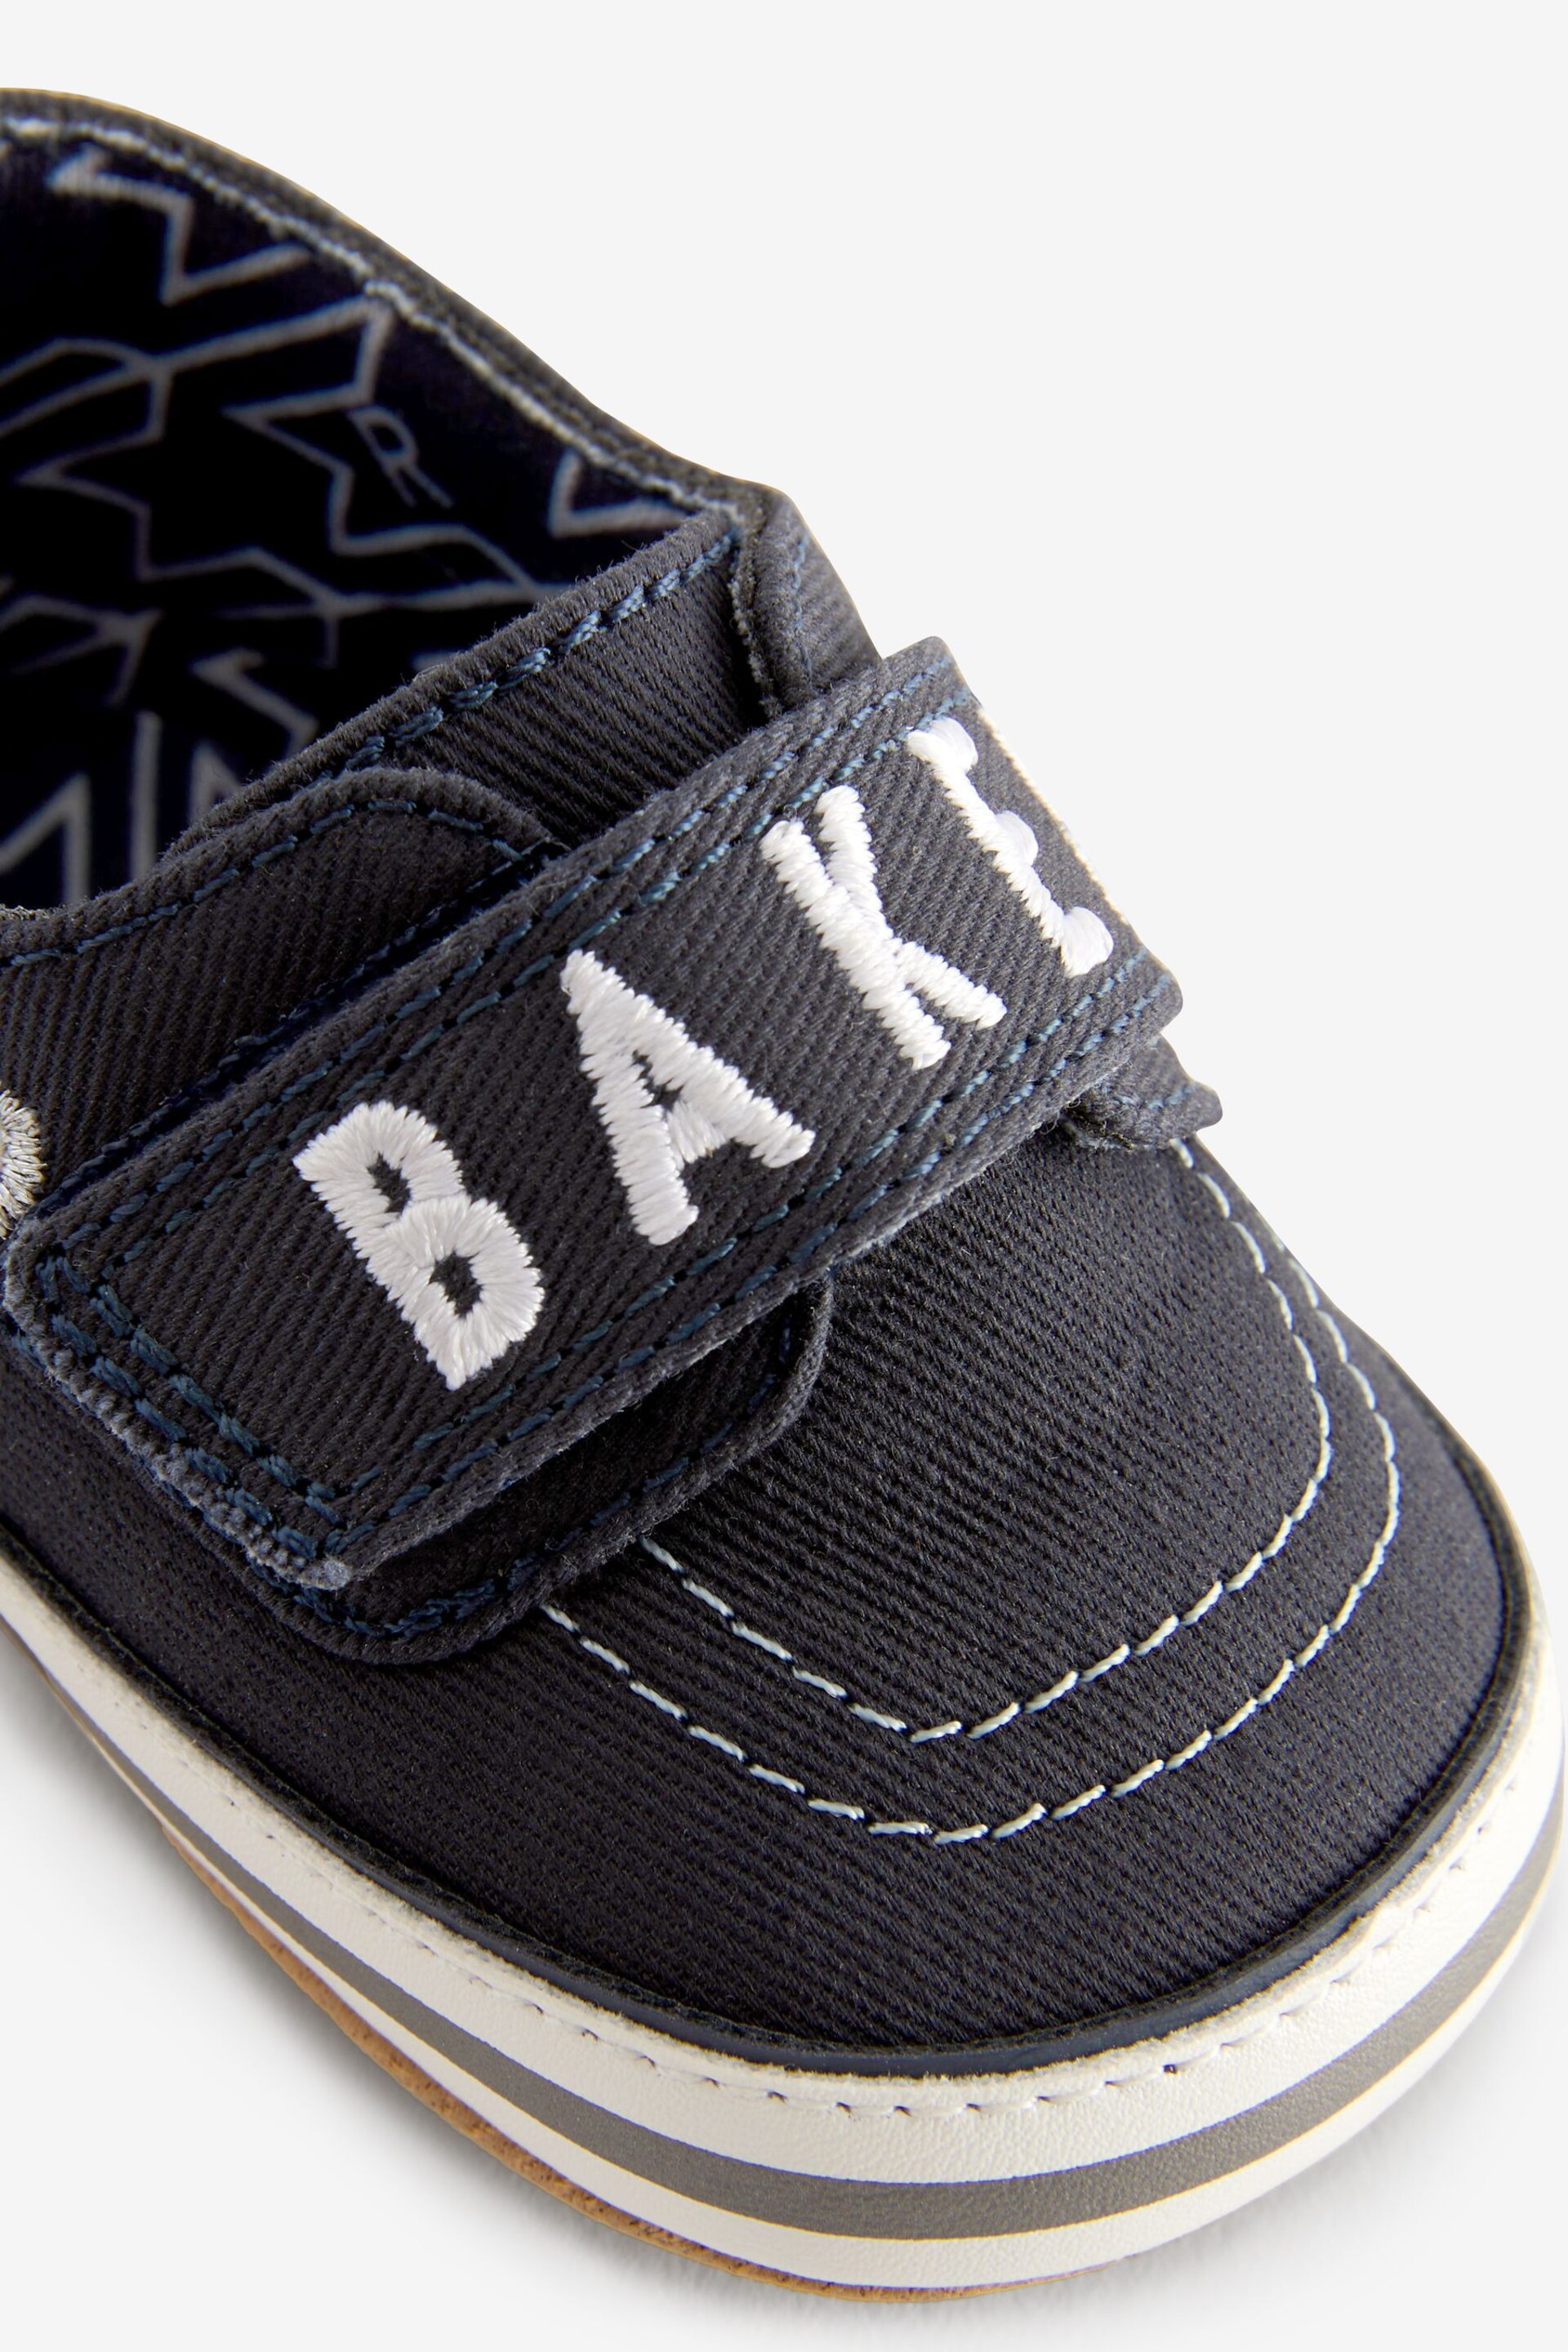 Baker by Ted Baker Baby Boys Boat Padders Shoes - Image 4 of 6